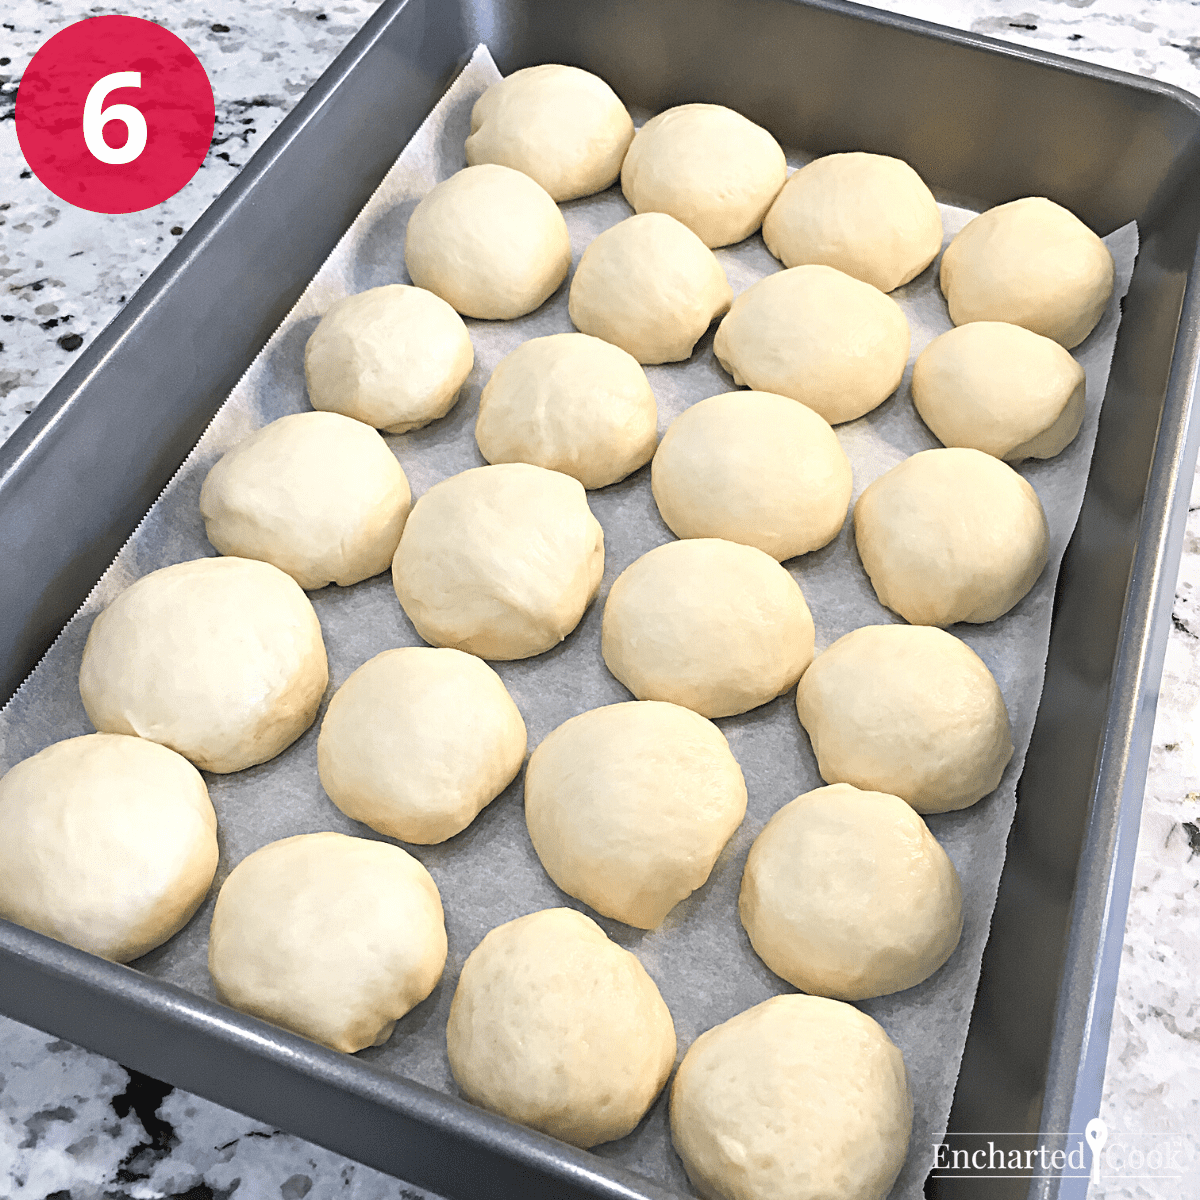 The dinner roll dough balls are placed in a baking pan.